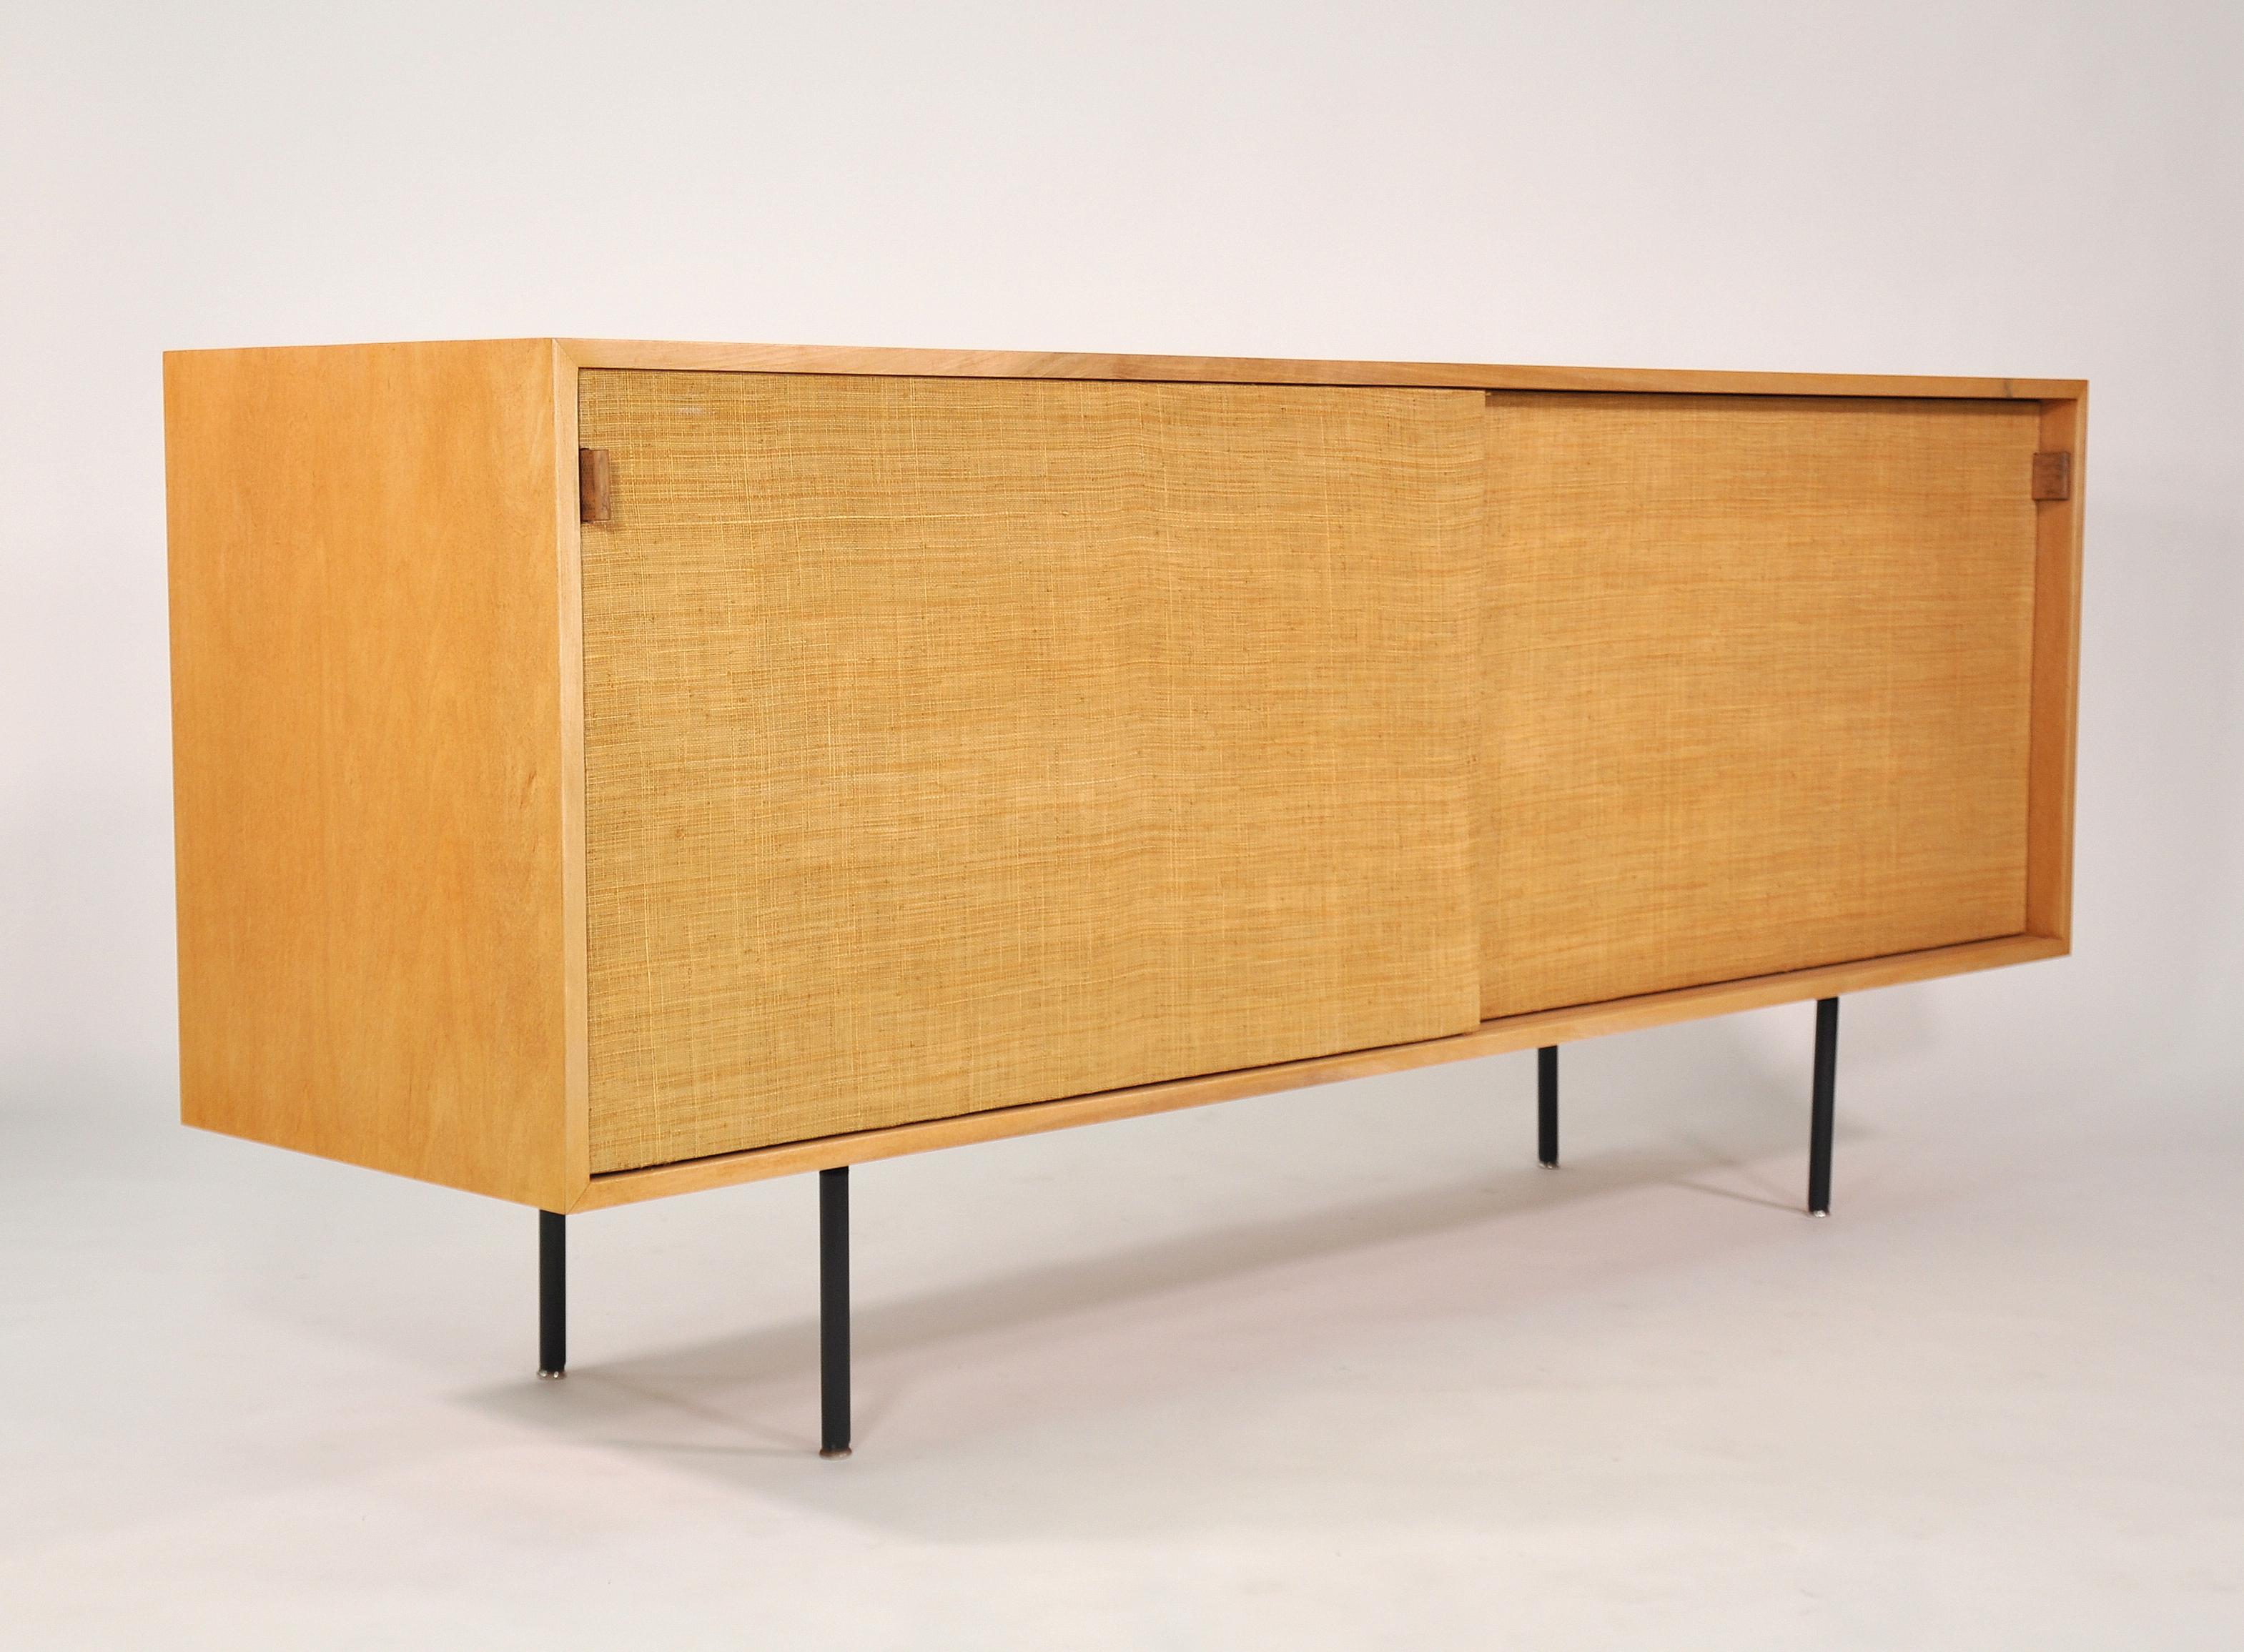 A maple, grasscloth and leather cabinet in the style of the 116 model designed by Florence Knoll in 1948 for Knoll Associates. The sideboard or bar features a pair of sliding doors with seagrass fronts and saddle leather handles, opening to a white